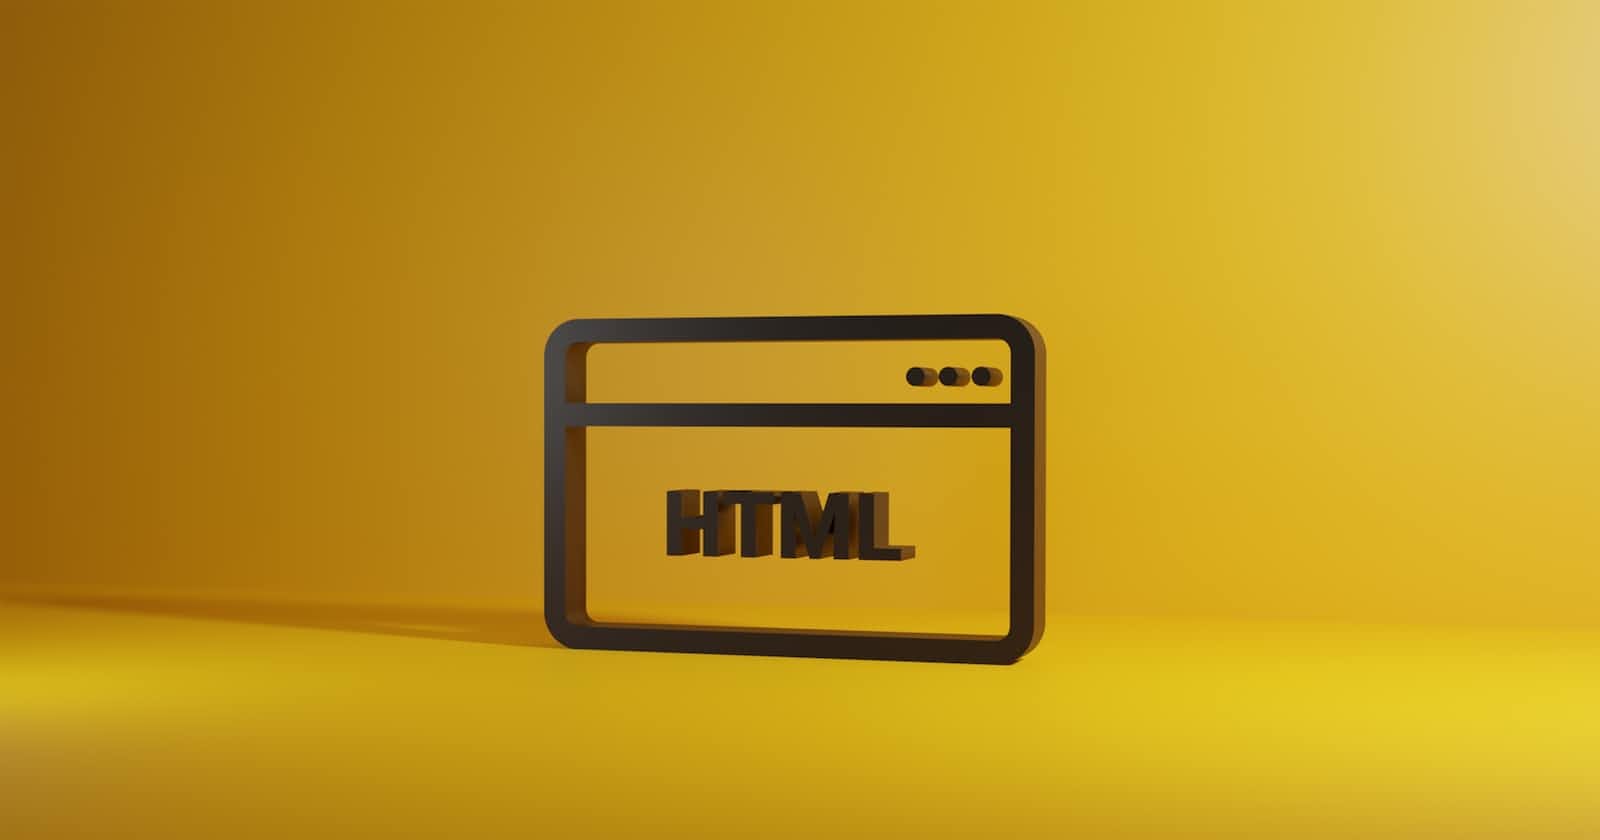 HTML (static websites and dynamic websites)